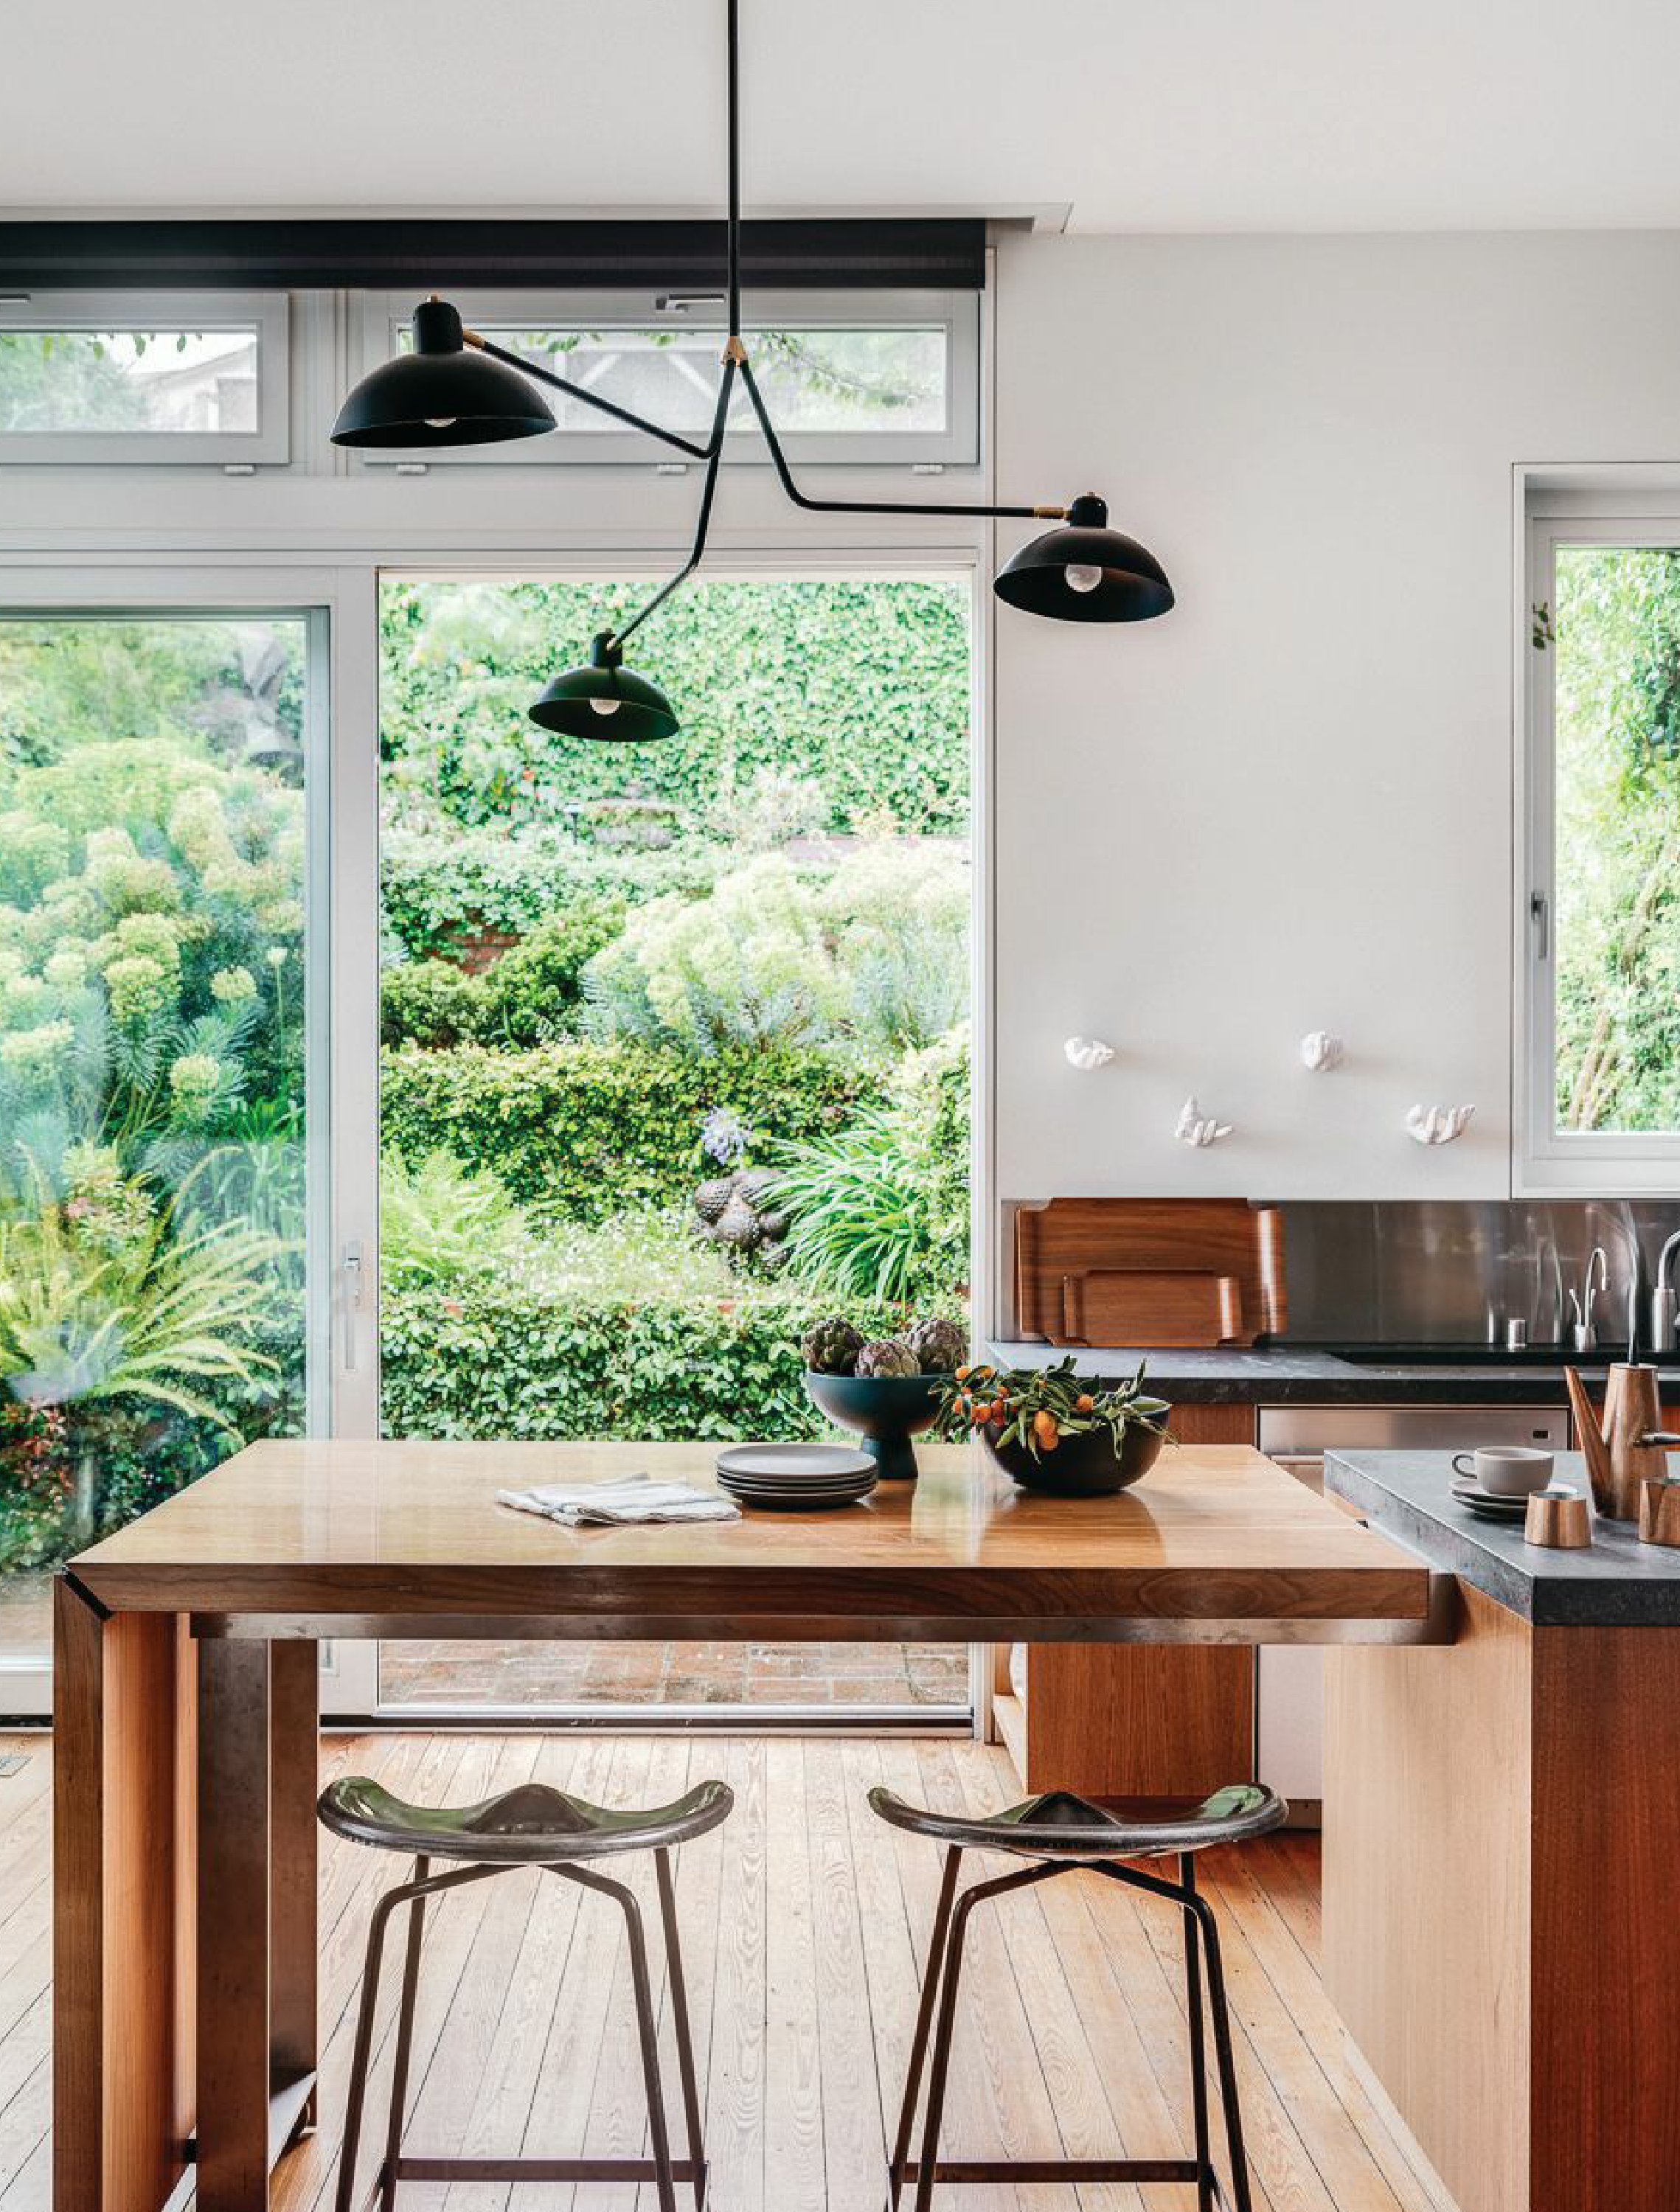 The kitchen looks out onto the client’s lush back garden. PHOTOGRAPH BY CHRISTOPHER STARK